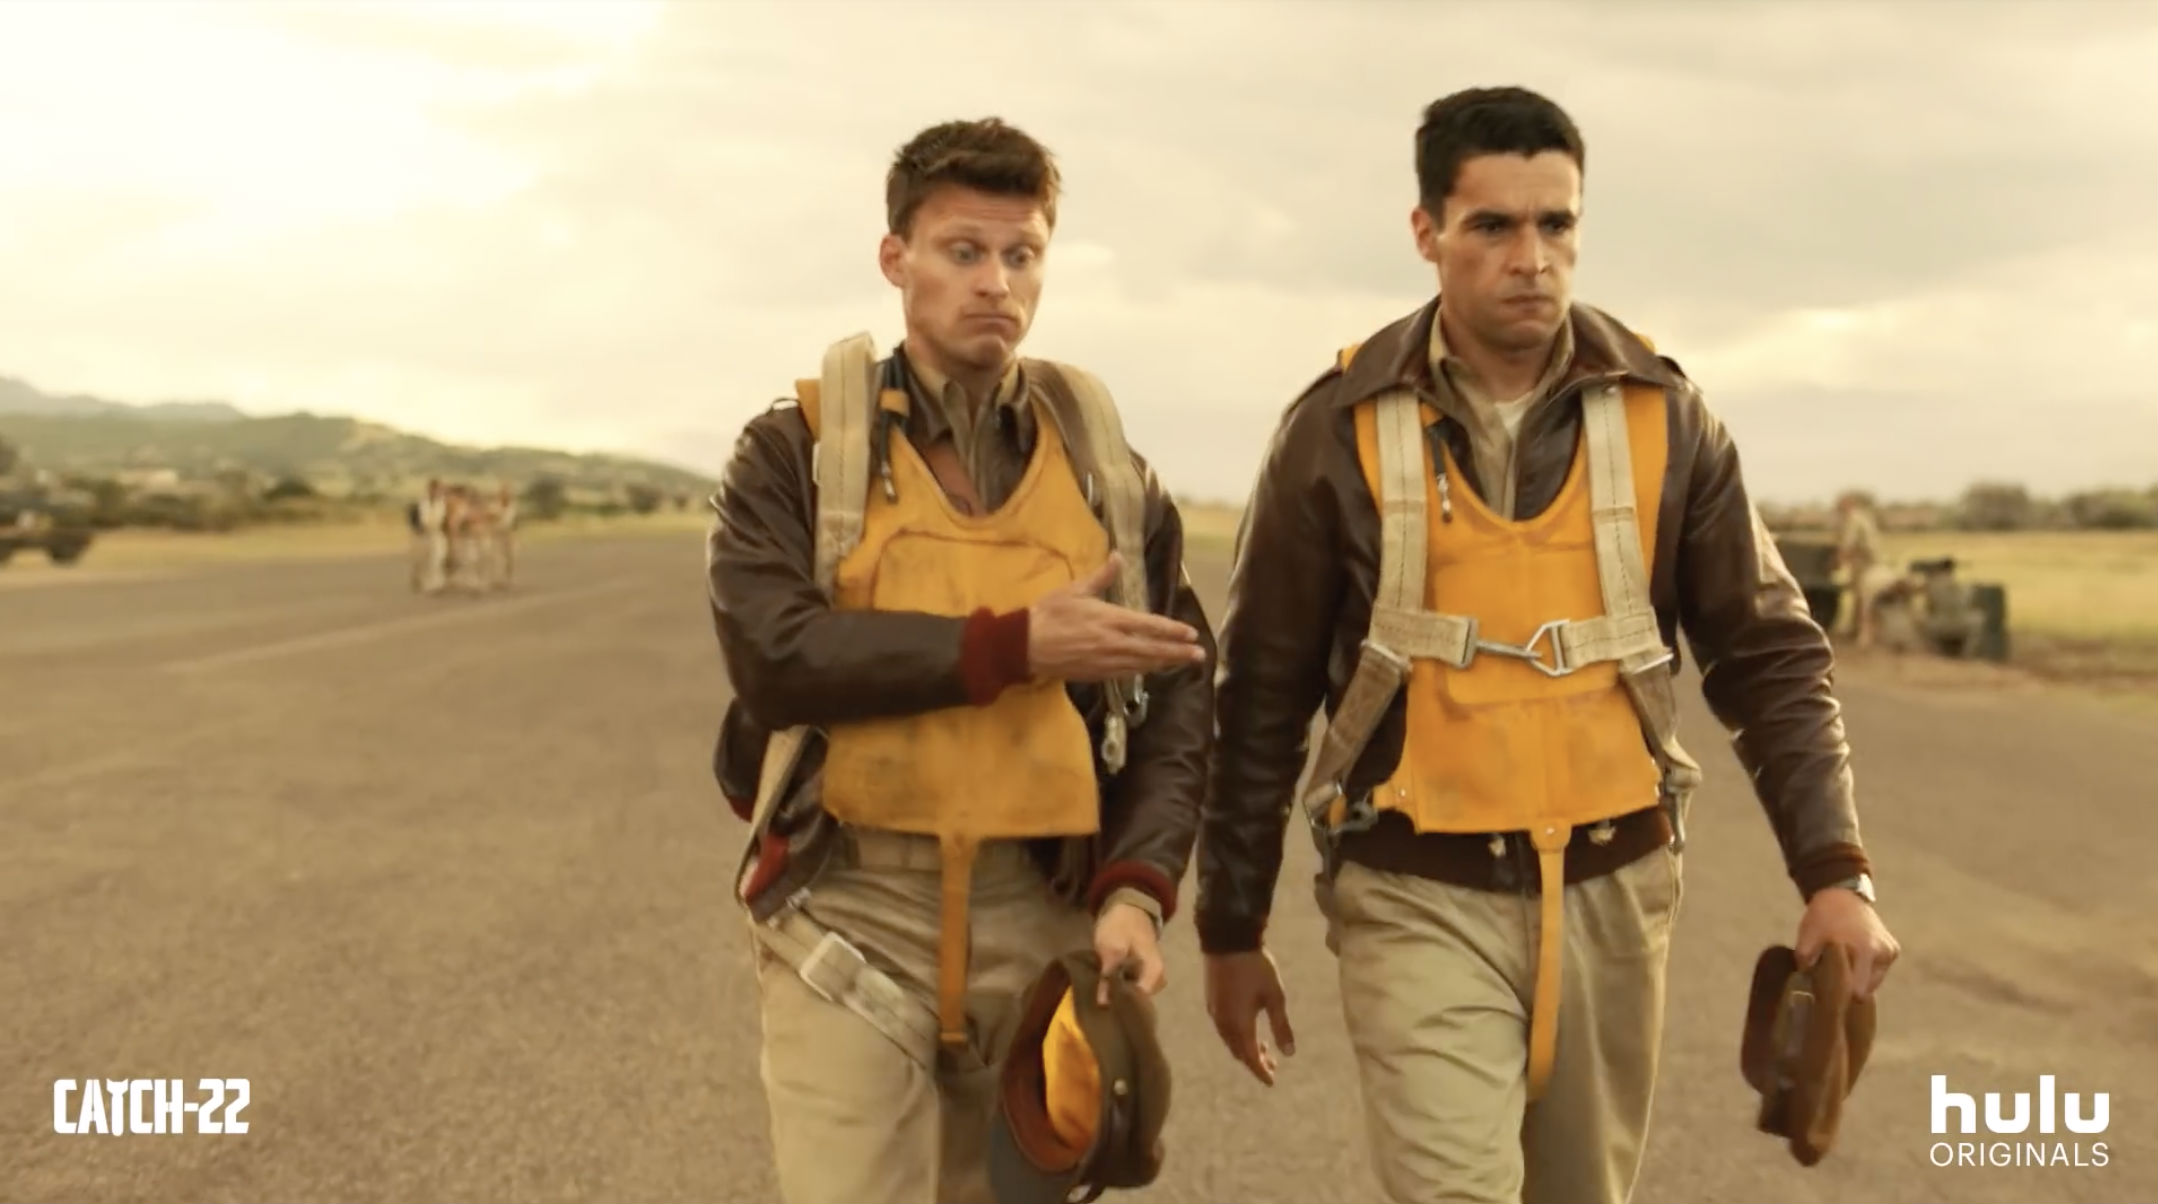 Catch-22 Trailer Captures The Nihilistic Hilariousness Of The Novel